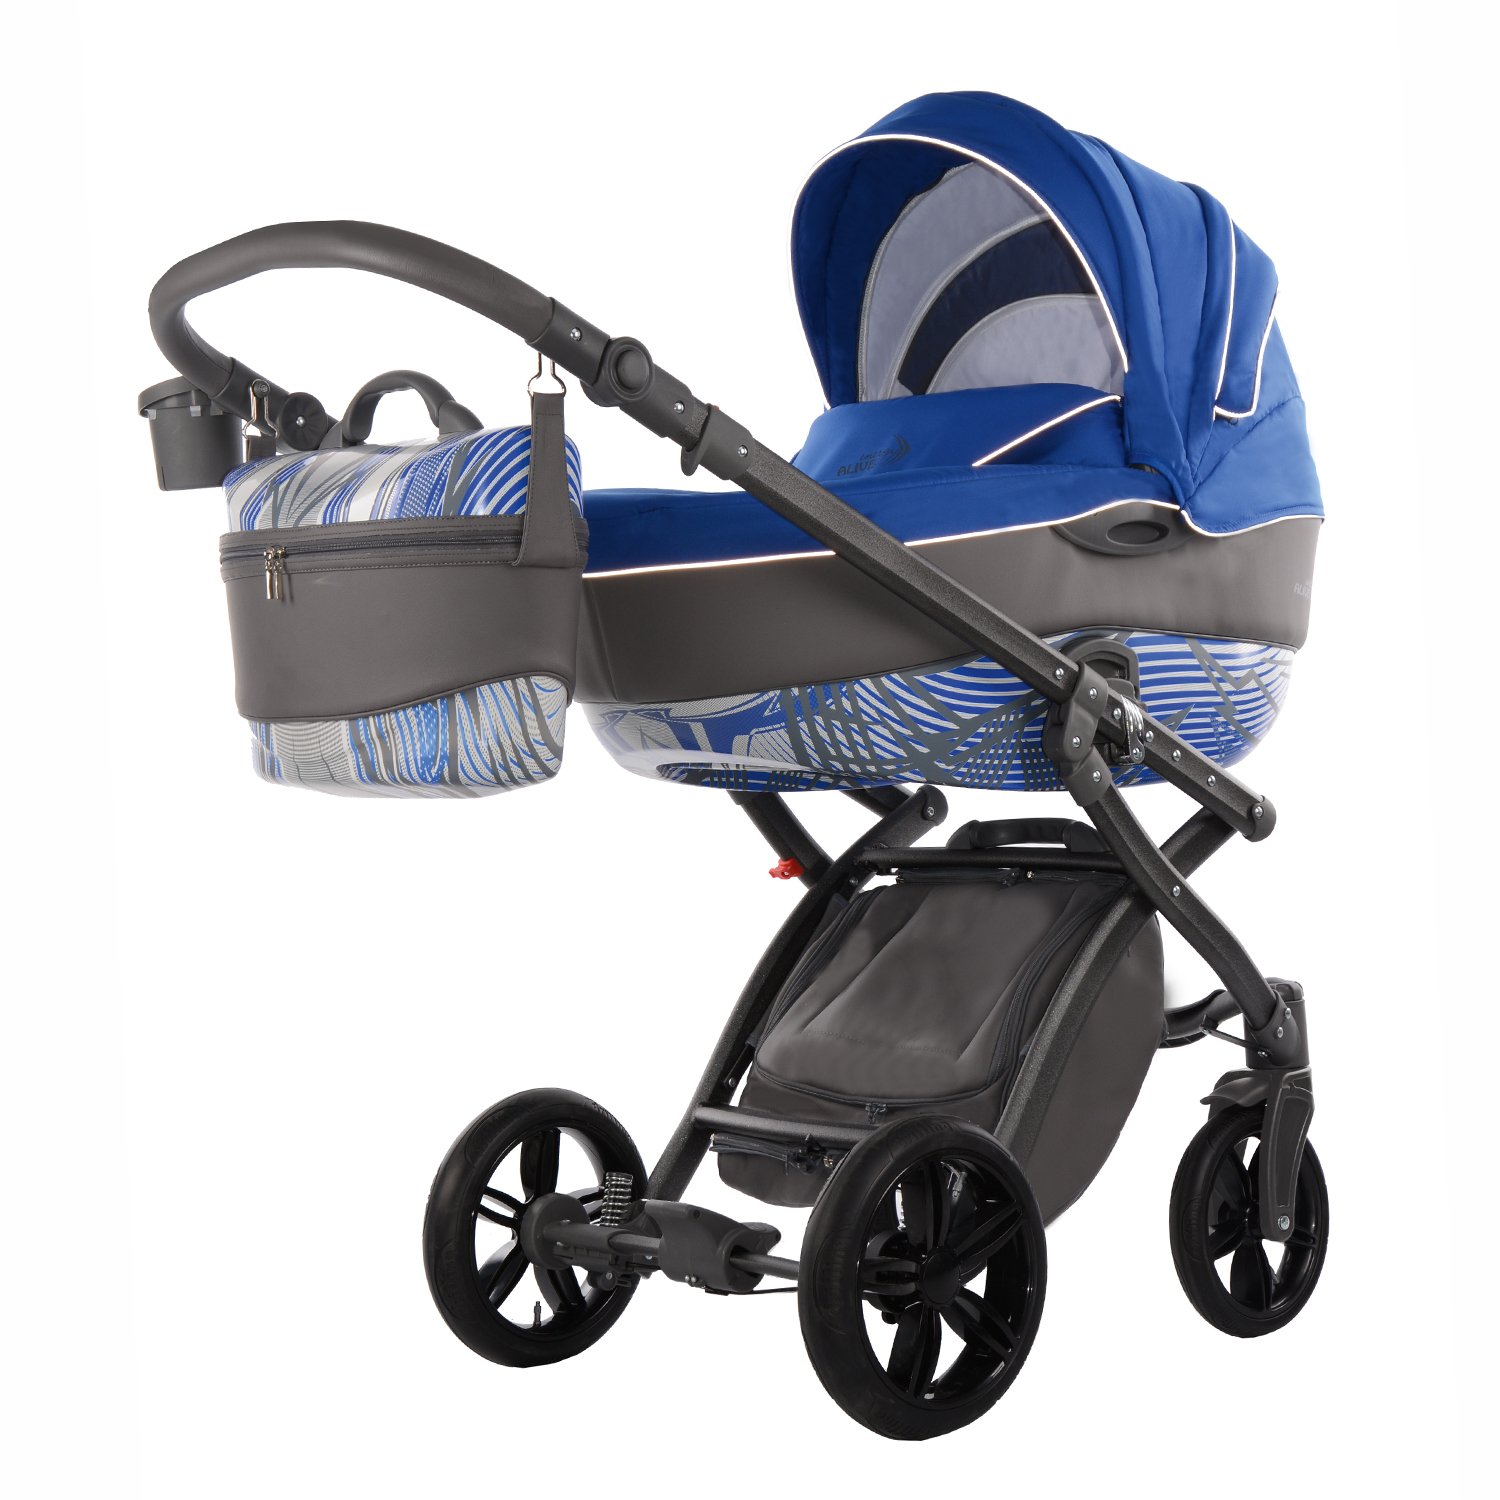 Knorr-Baby Alive Energy 3544-4 Combi Pushchair Azure Blue